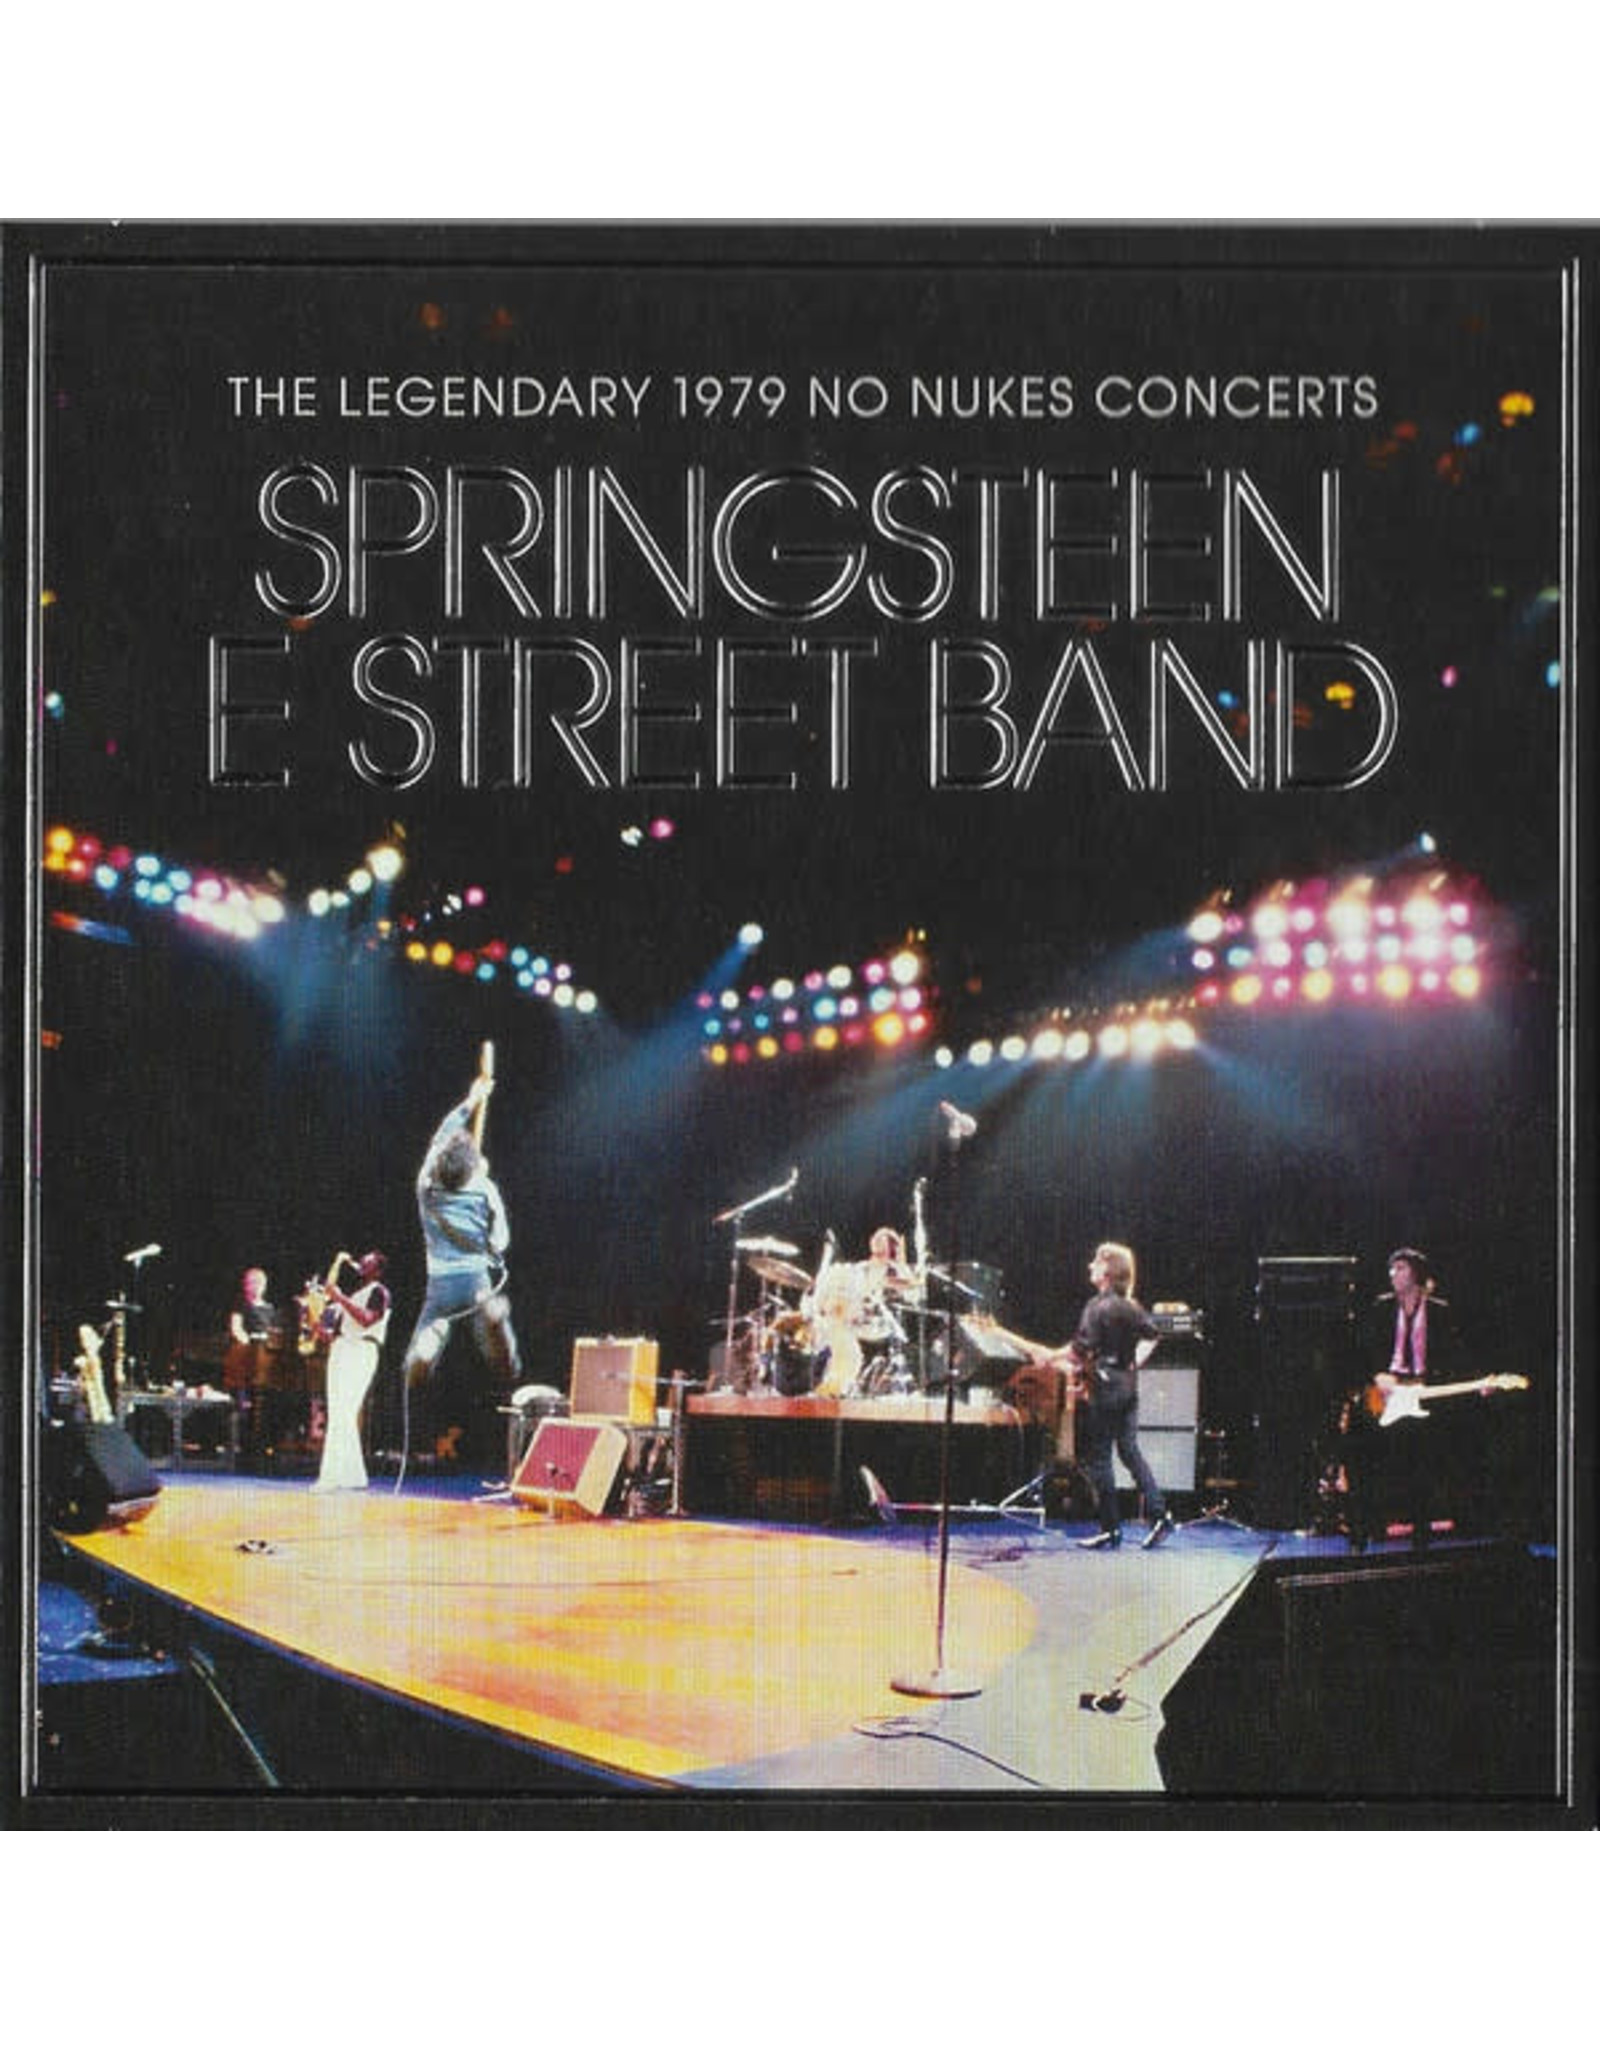 Springsteen, Bruce & The E Street Band - The Legendary 1979 No Nukes Concert  2CD & Blu-ray